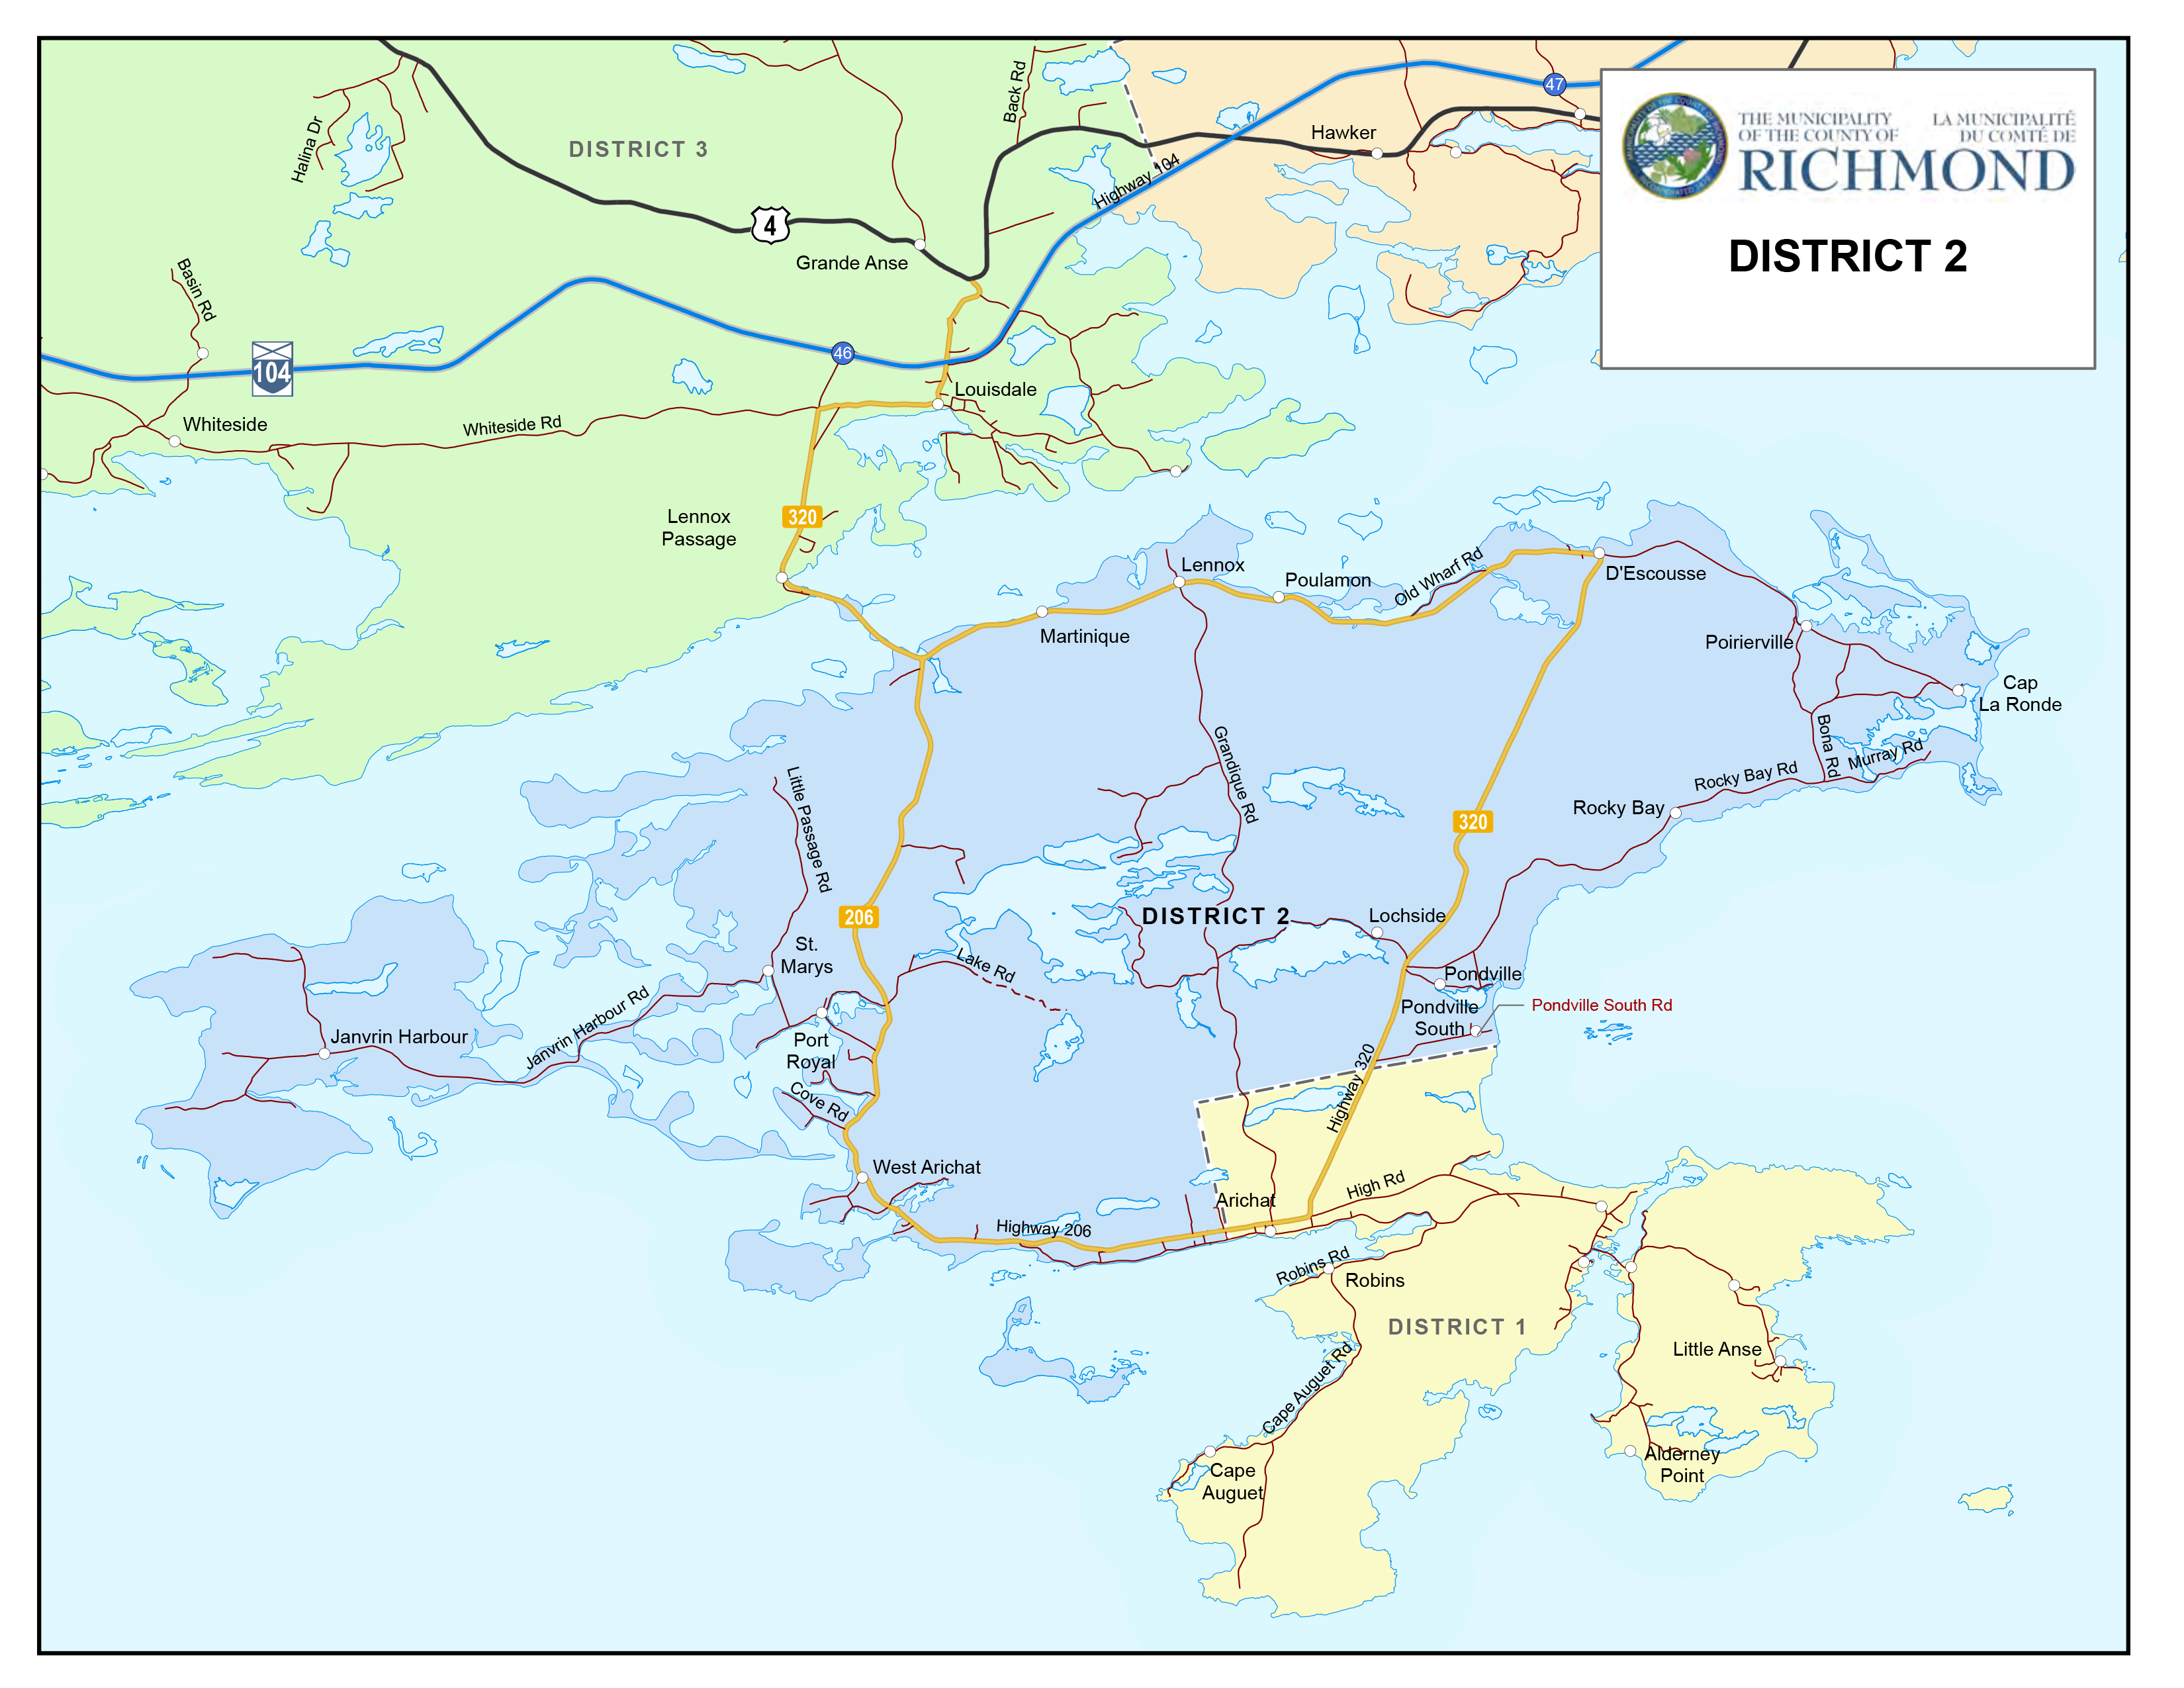 Graphic showing map of Electoral District 2 of the Municipality of Richmond County